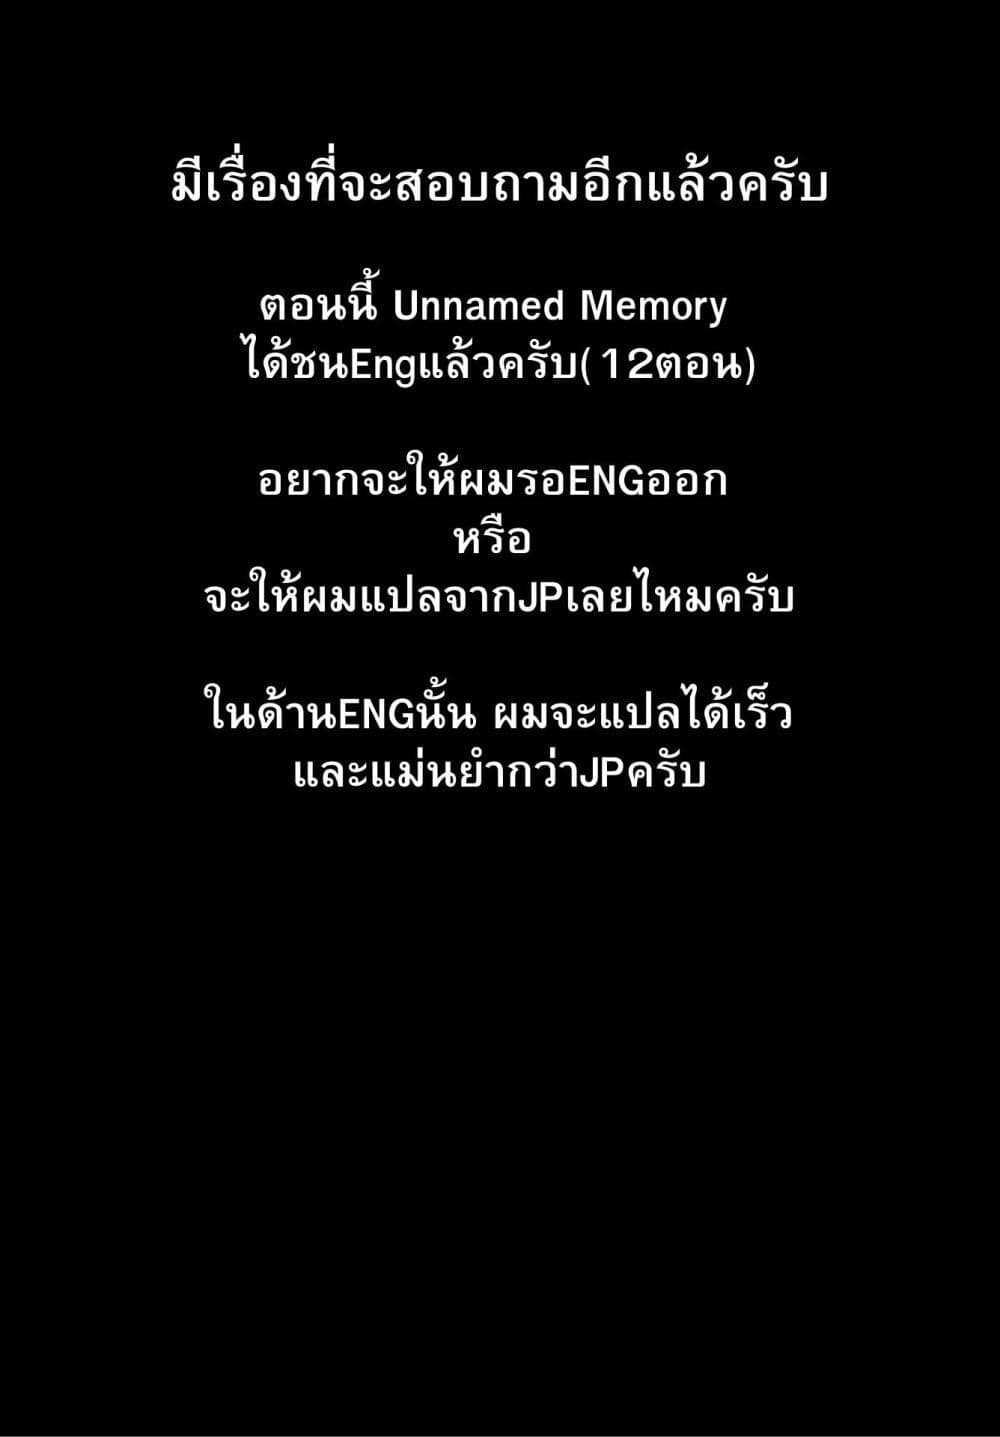 Unnamed Memory 12.2 18